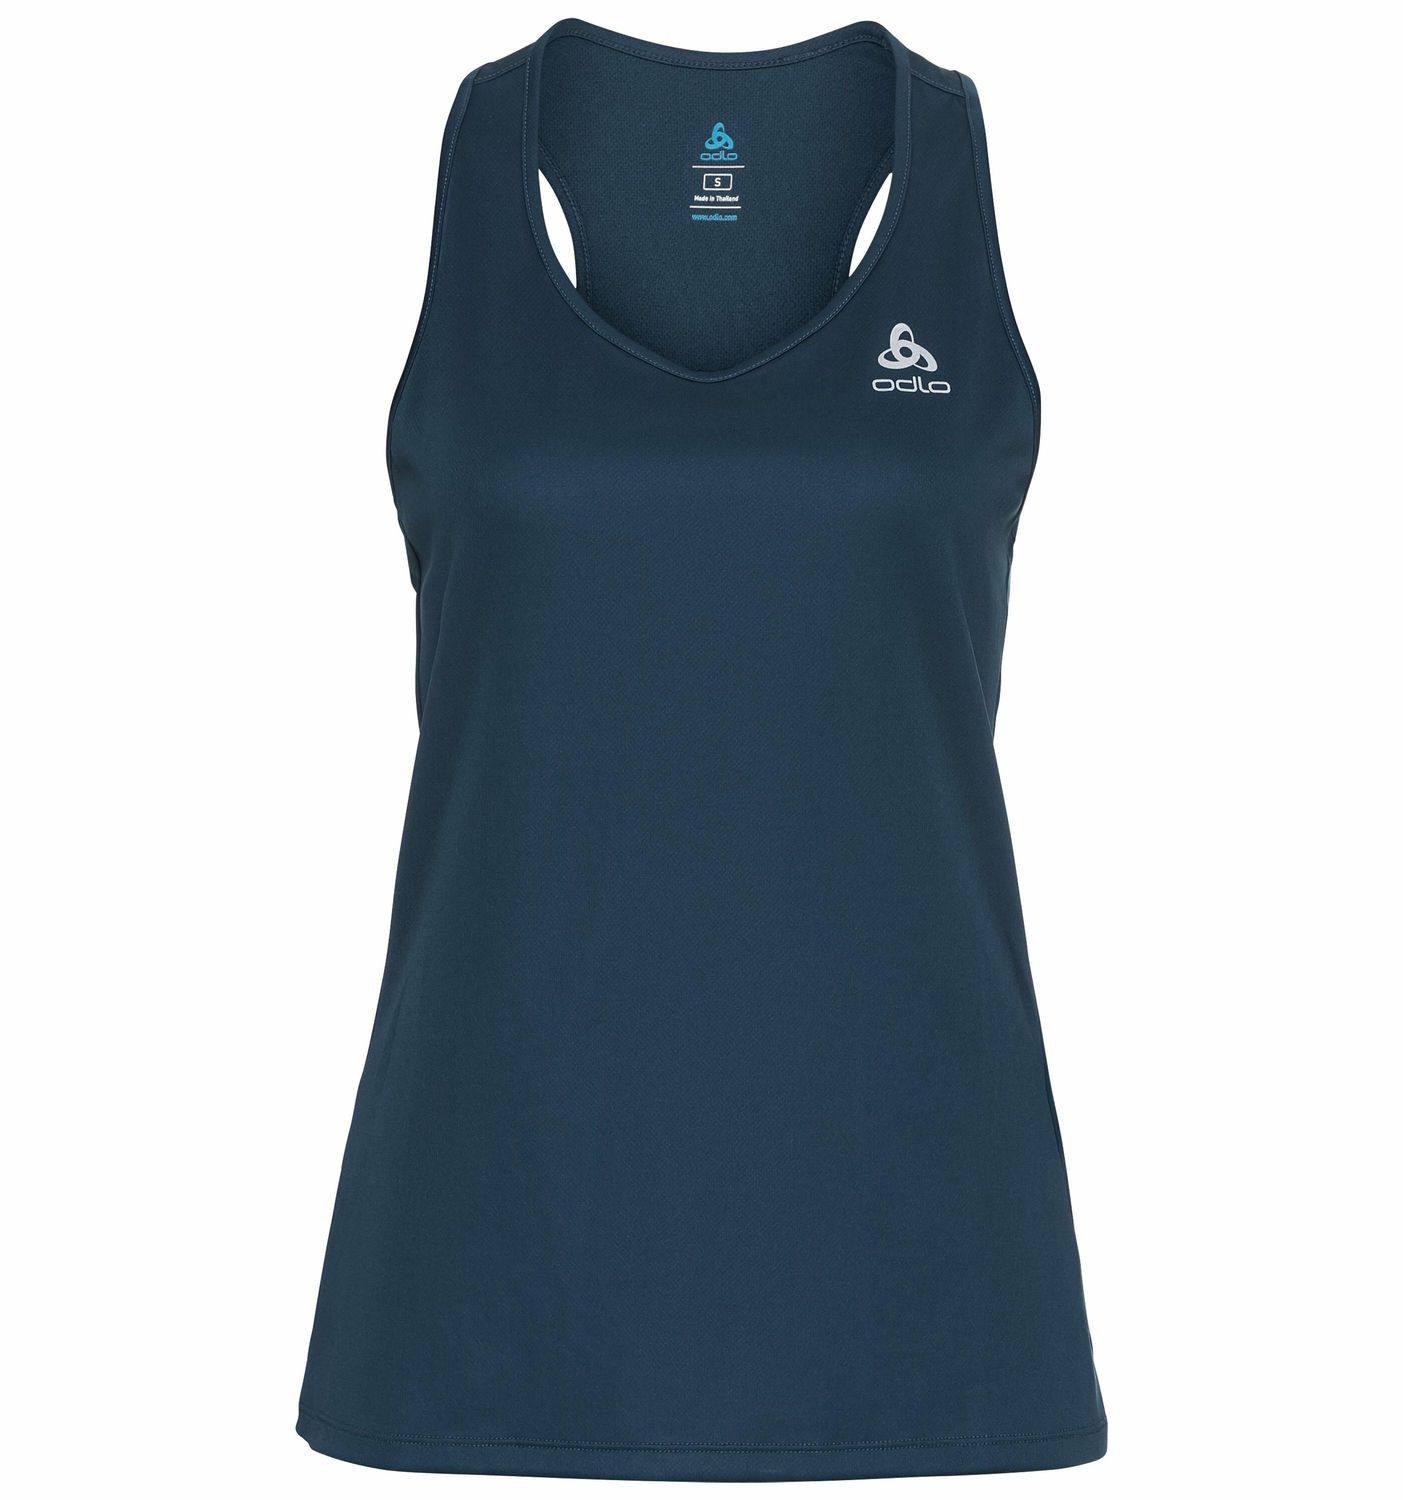 Women’s Essential Base Layer Running Singlet Teal XS